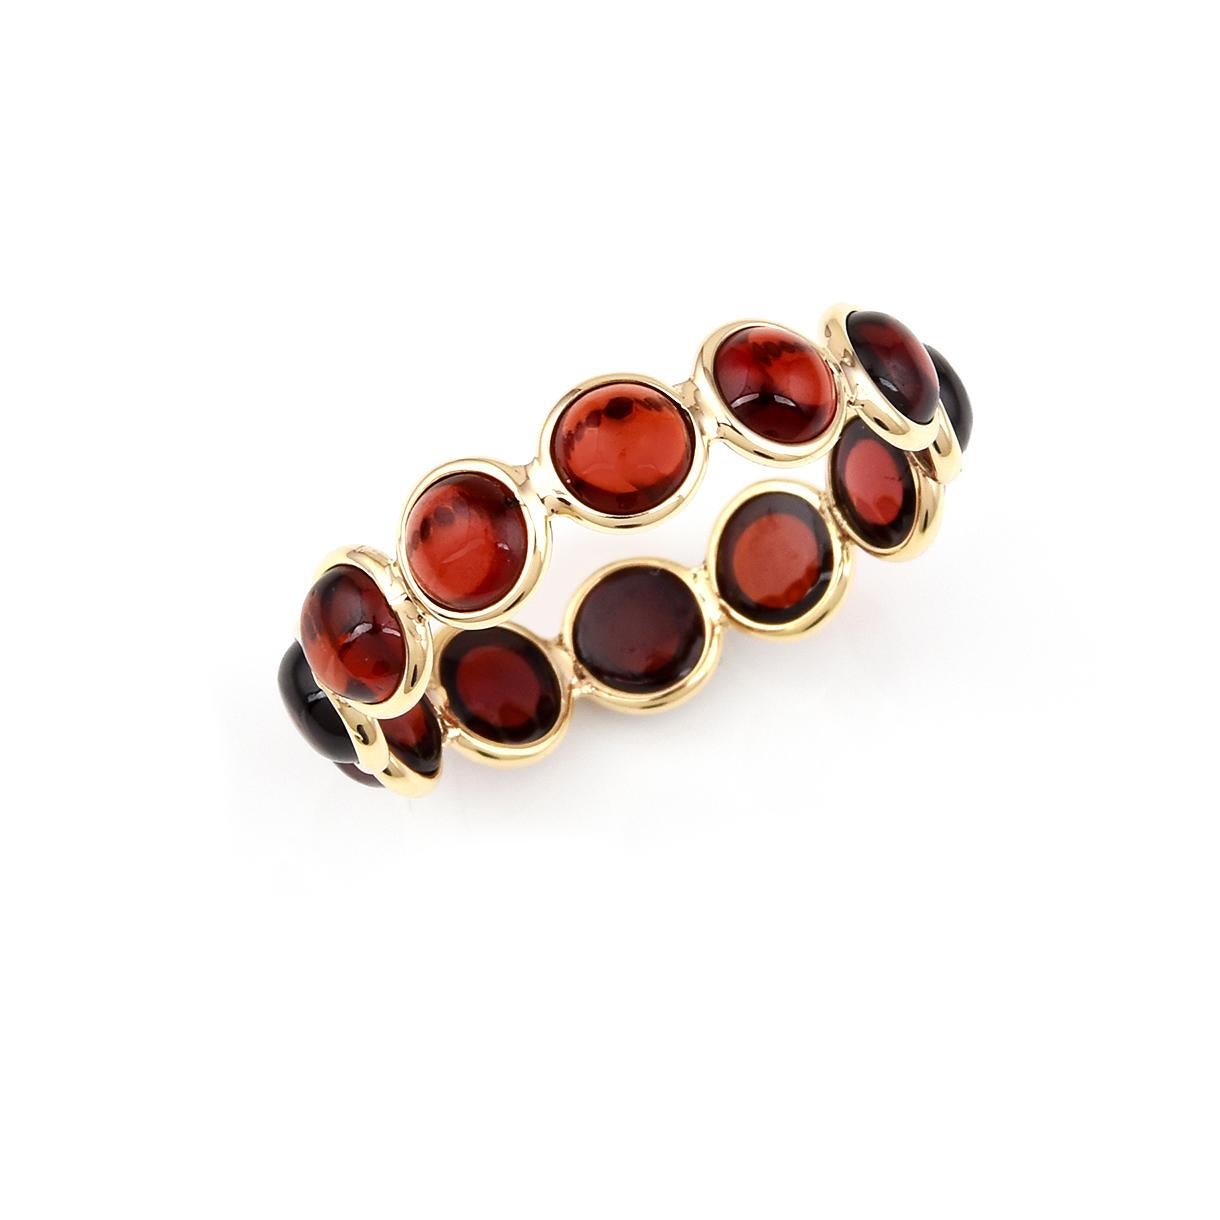 Shape: Round Cabochon

Stone: Garnet

Metal: 14 Karat Yellow Gold (can be customized)

Style: Single Line Band

Ring Size: US 7.75 (can be customized)

Stone Weight: appx. 5 carats of Garnet

Total Weight: 1.60 grams